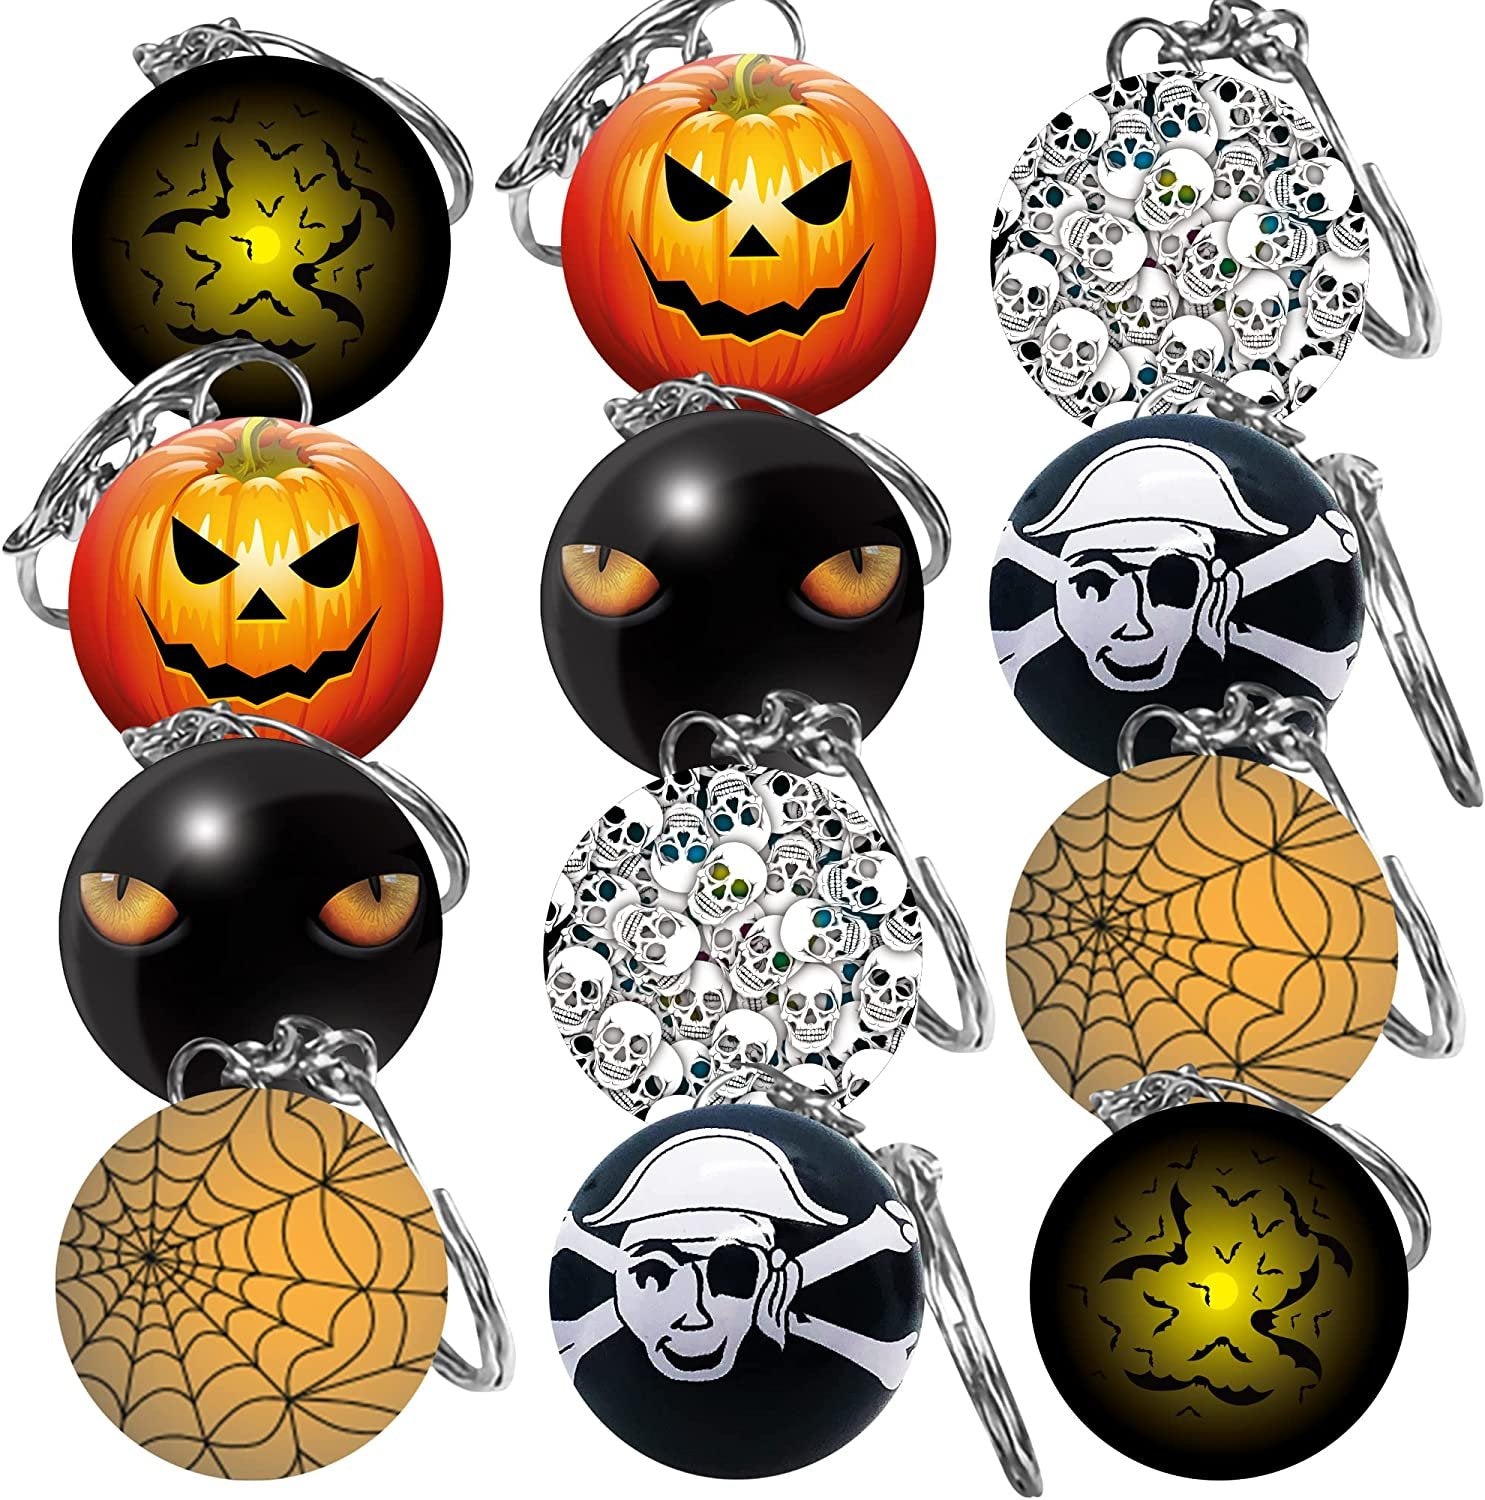 Halloween Keychain Assortment, Set of 36, Metal Keychains in Assorted Designs, Great as Halloween Party Favors, Halloween Gifts, Teacher’s Awards, Non-Candy Trick or Treat Supplies